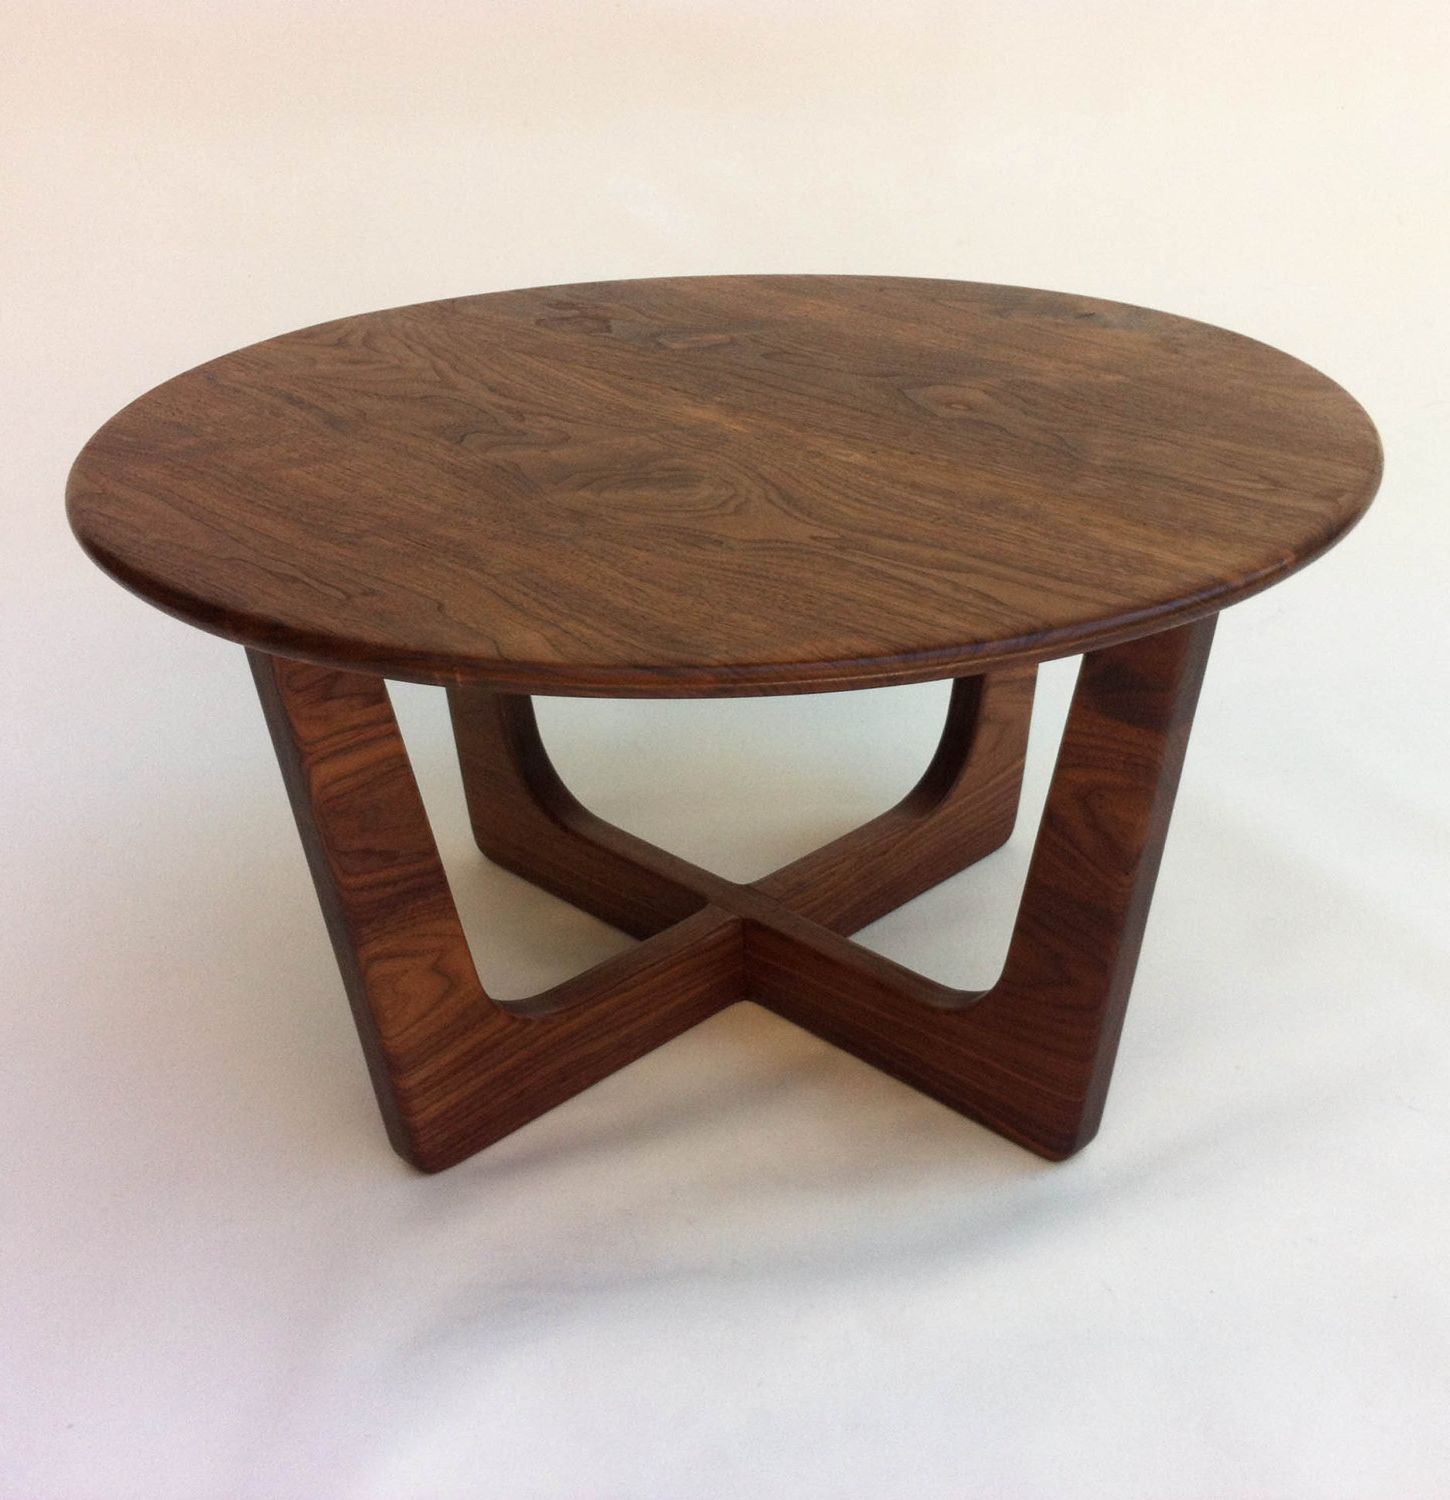 Wooden Mid Century Coffee Tables Inside Most Current Solid Walnut Round Mid Century Modern Coffee Table (View 3 of 15)